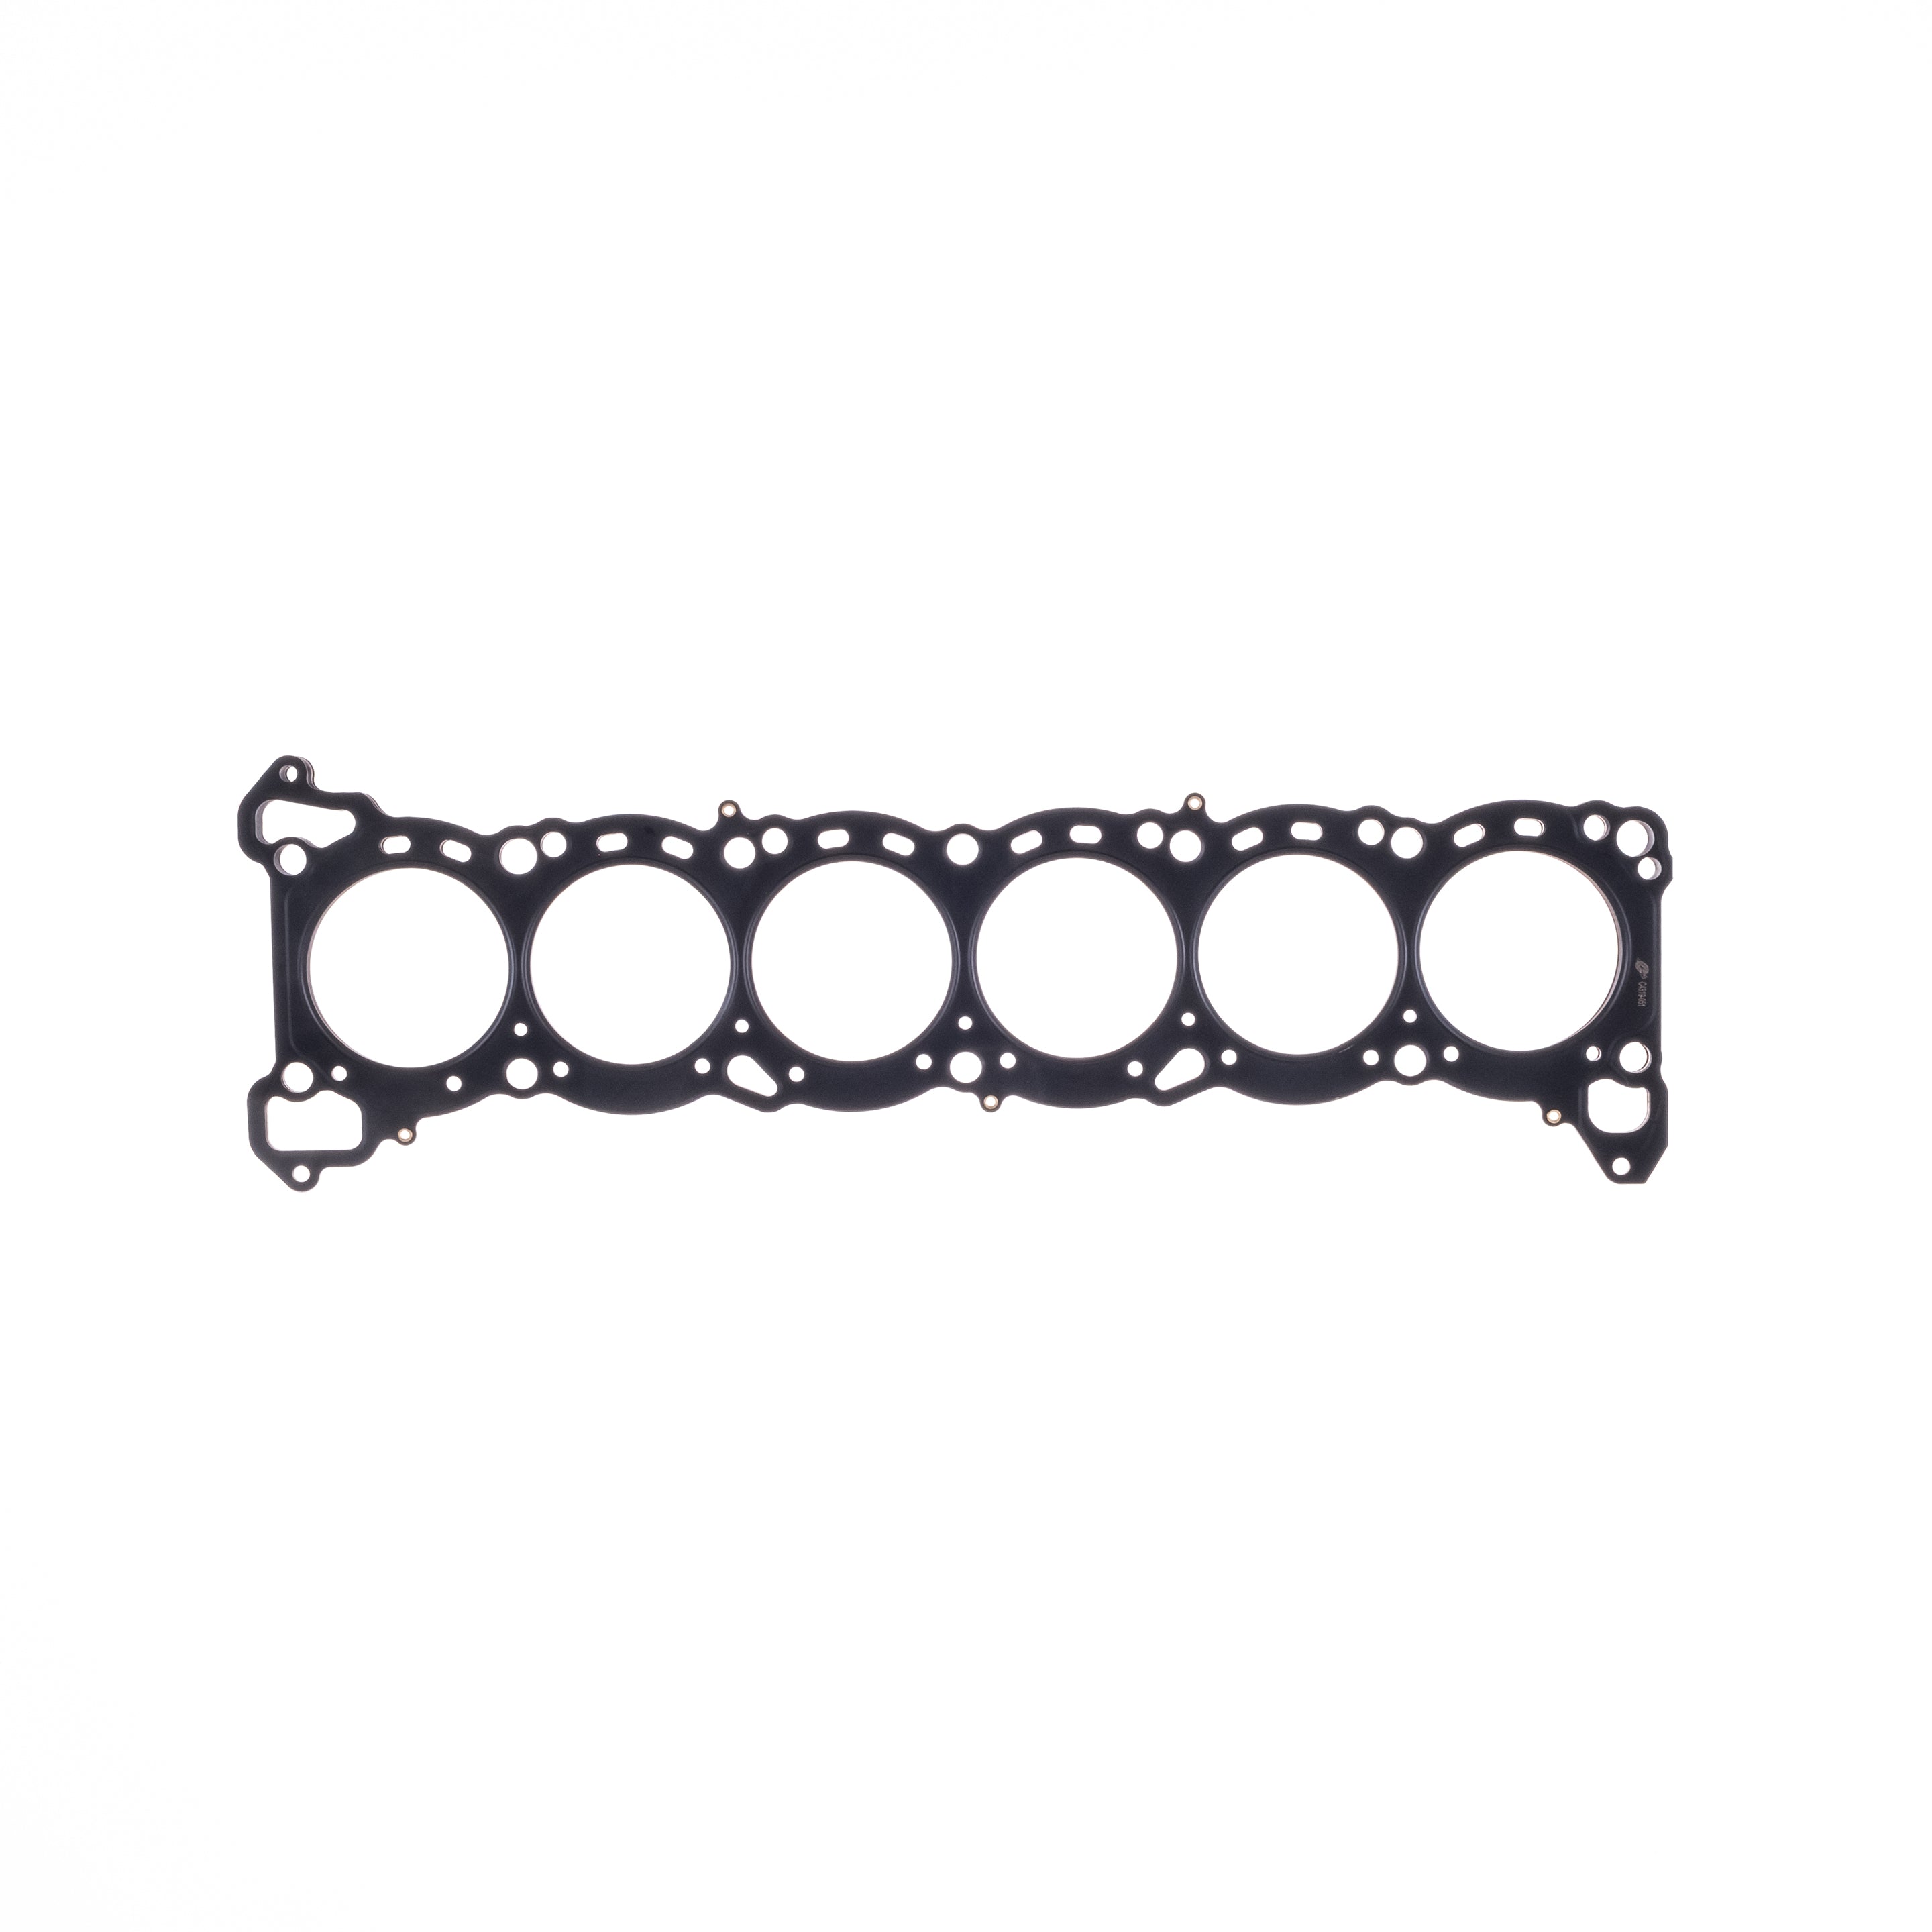 Cometic Nissan RB26 Head Gasket 1.3mm Thick (88mm) - C4321-051